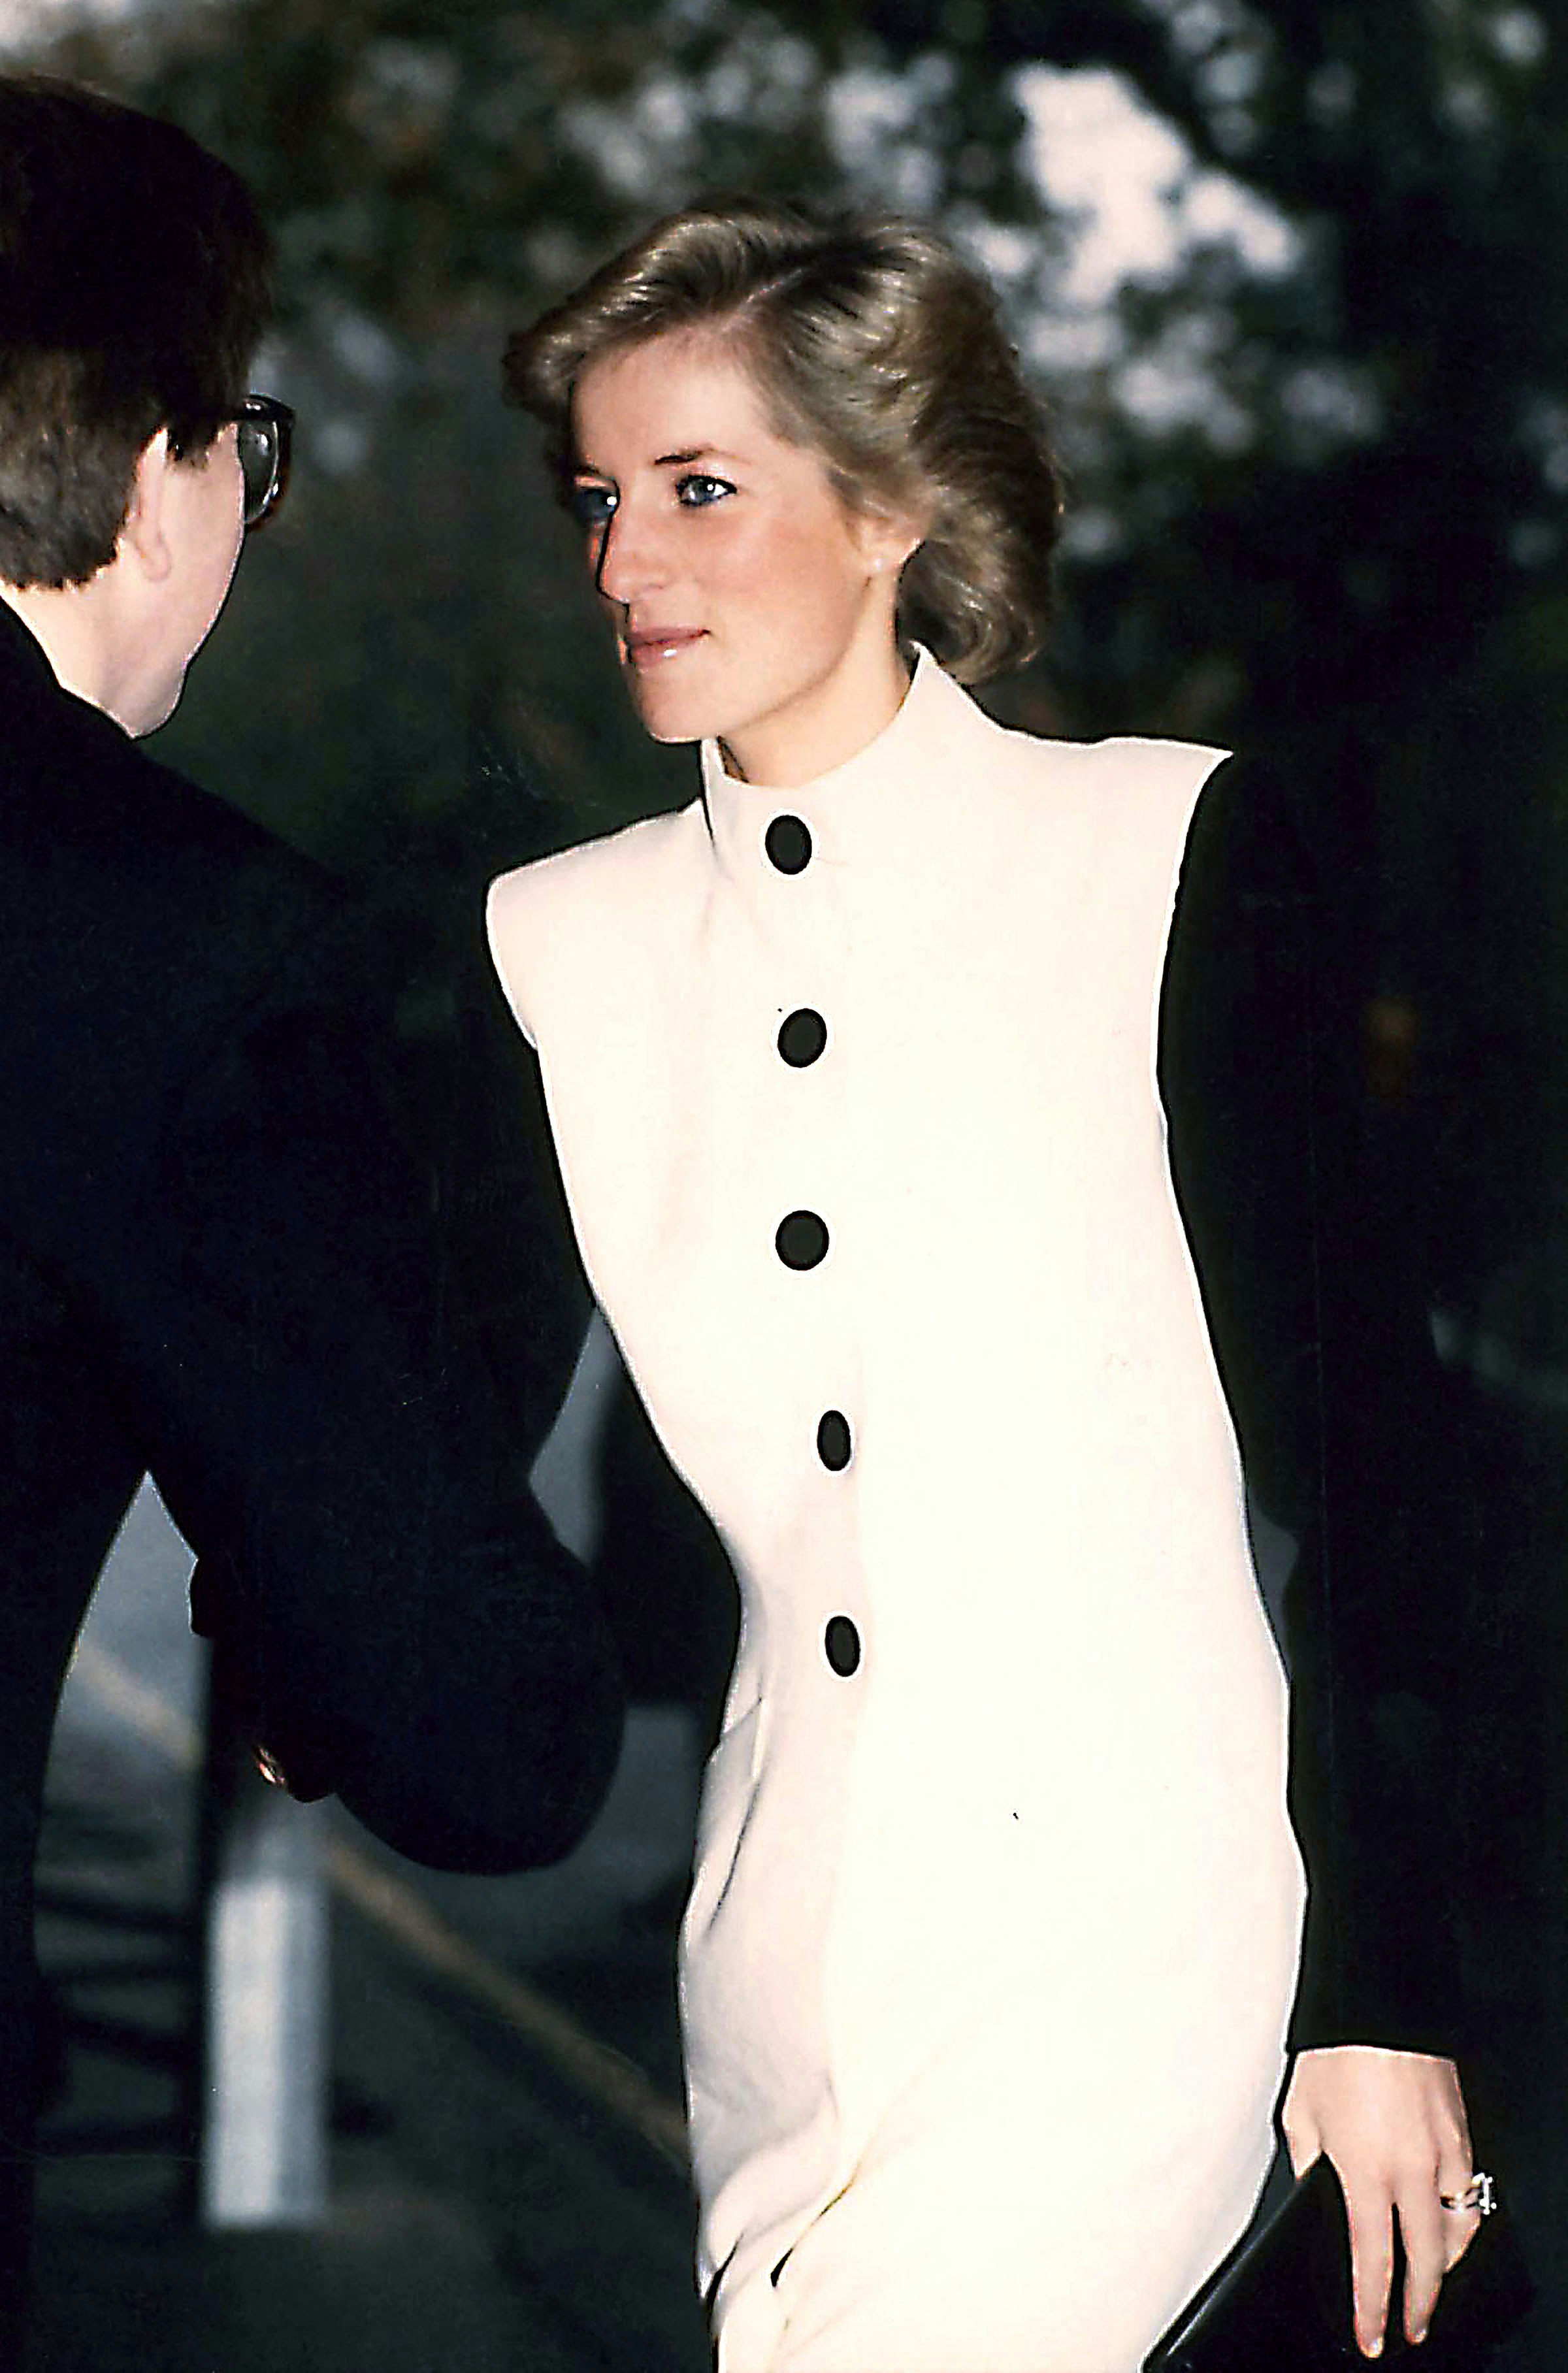 Princess Diana participating in various Royal engagements from Washington, DC and London during the 2nd half of the 80's when she was still married to Prince Charles. 26 Jun 2017 Pictured: Princess Diana attends a luncheon at The Savoy Hotel in London in 1988. Photo credit: Jennifer Mitchell / MEGA TheMegaAgency.com +1 888 505 6342 (Mega Agency TagID: MEGA45565_001.jpg) [Photo via Mega Agency]